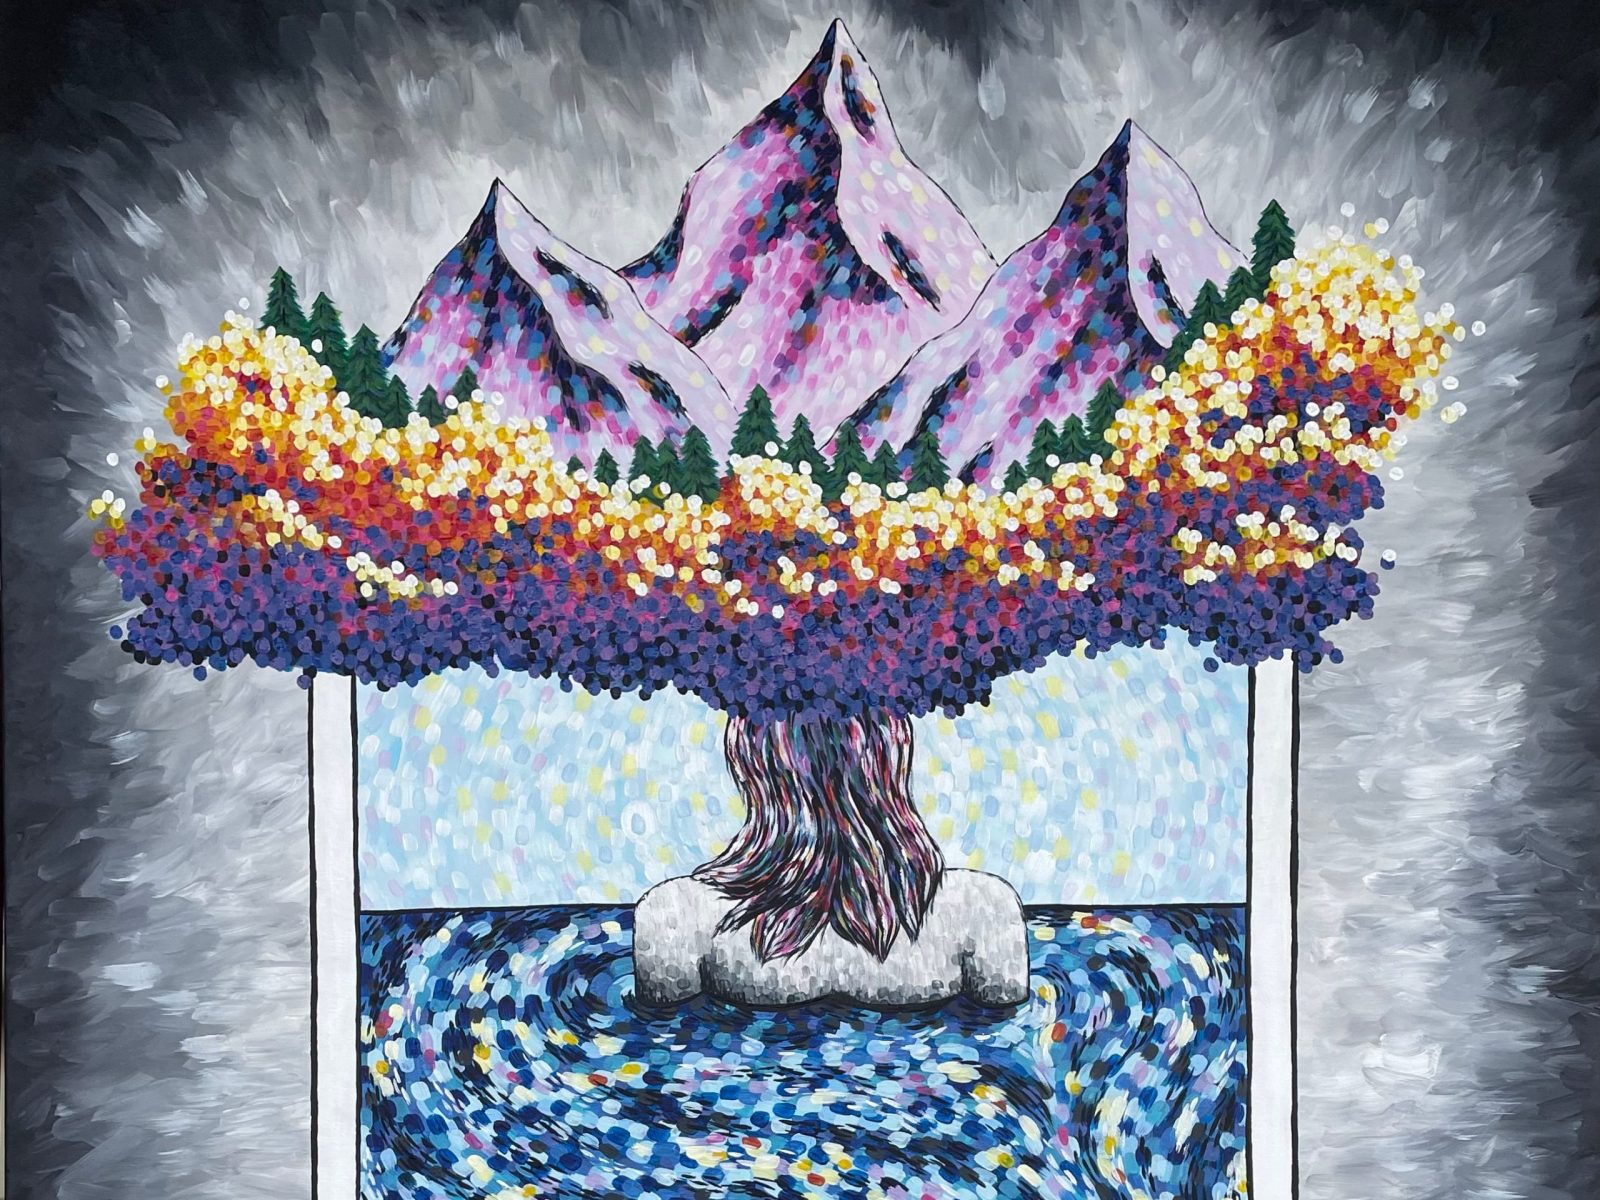 A painting of a person emerging from a body of blue water, with colorful mountains coming out of their head